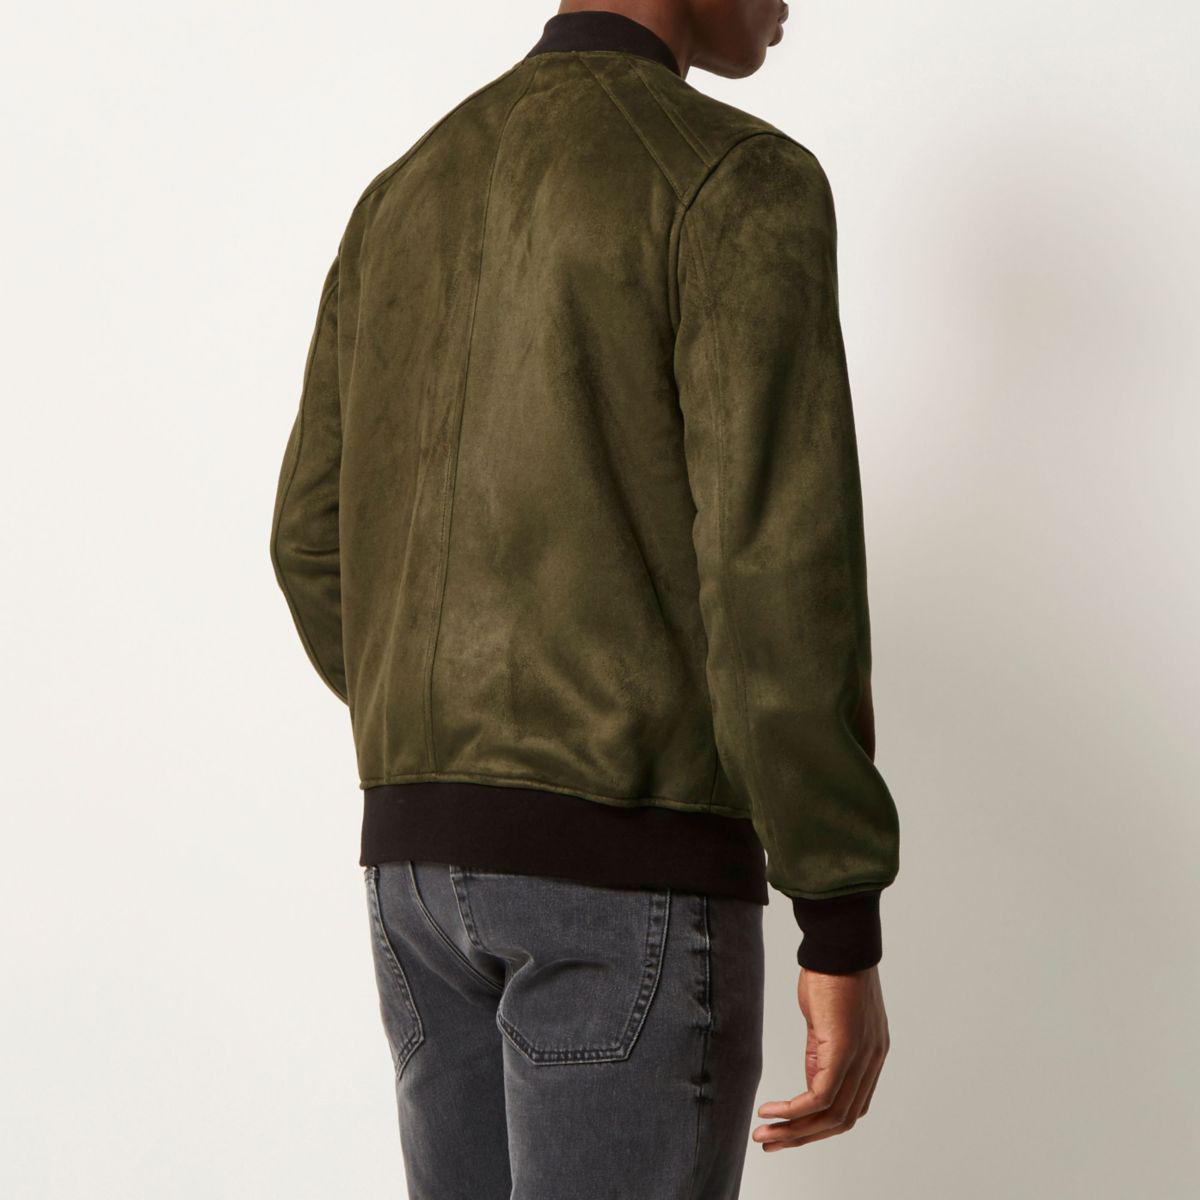 Lyst - River Island Green Faux Suede Bomber Jacket in Green for Men